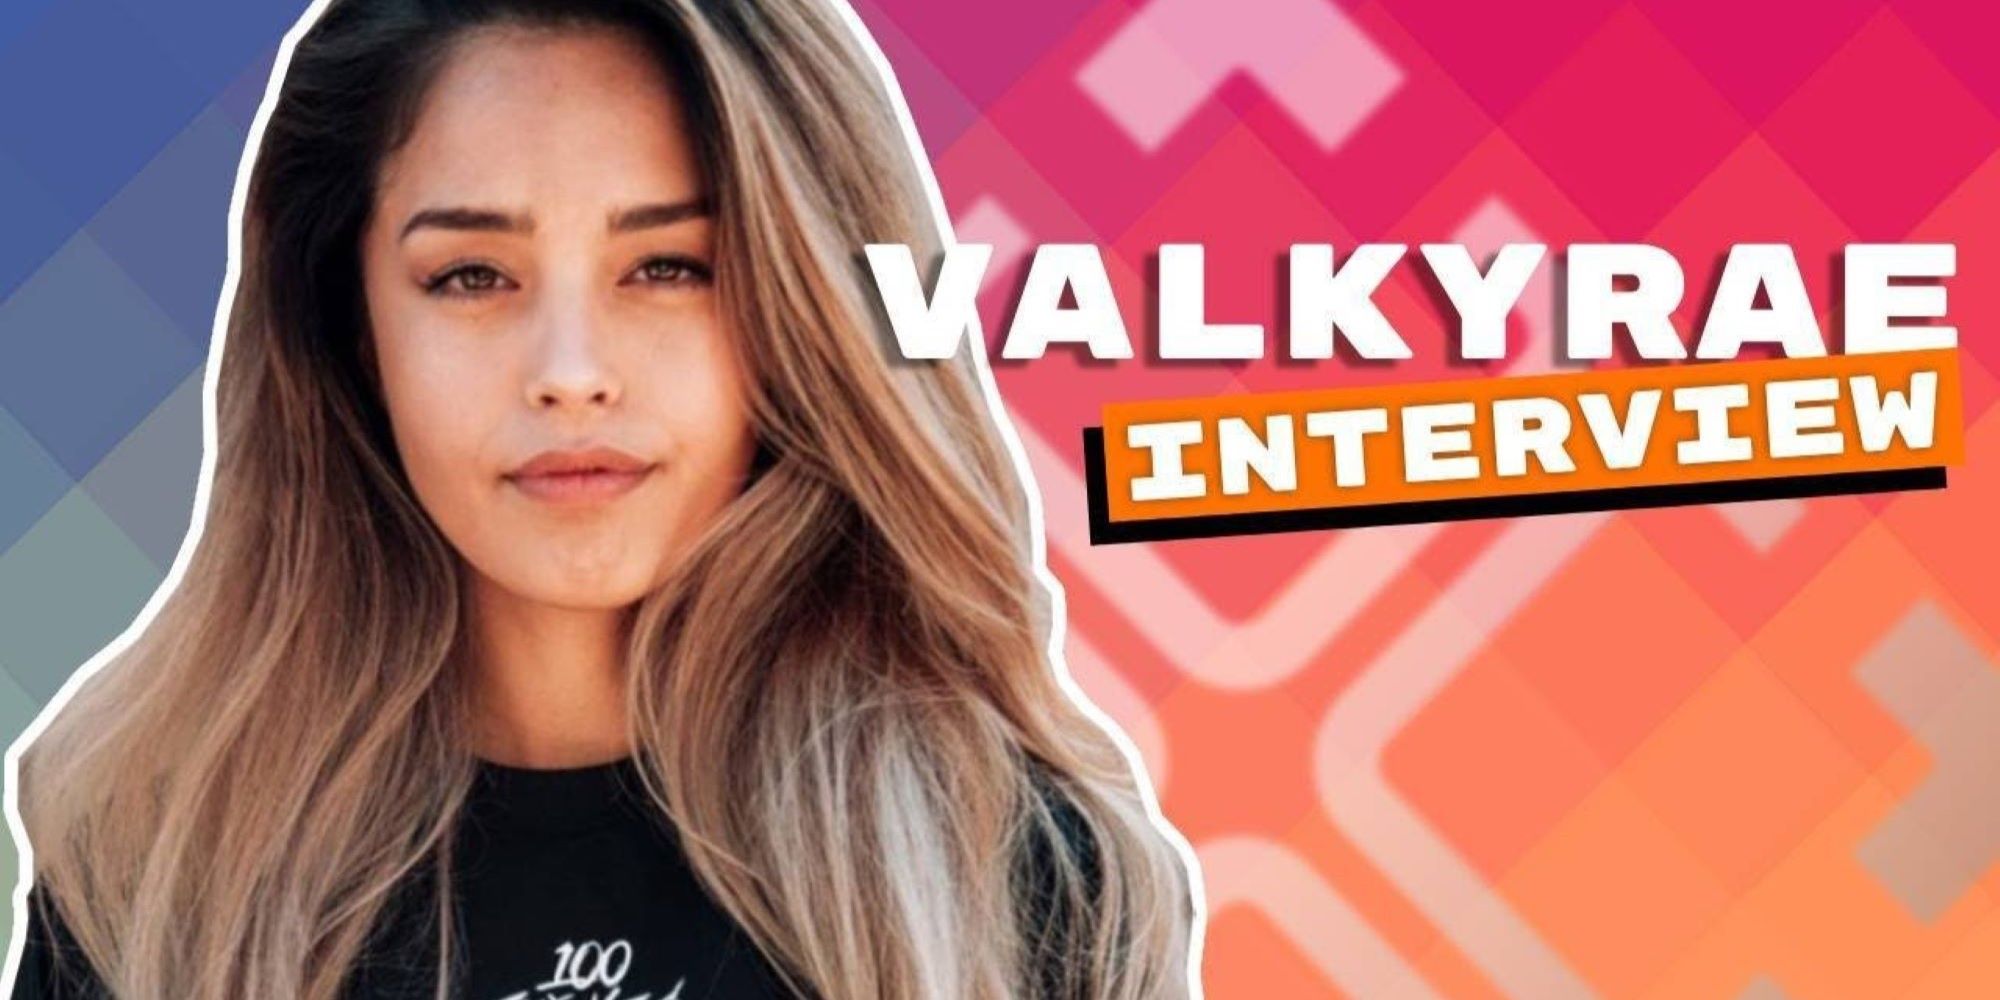 Where Does Valkyrae Live? This Is What We Know.